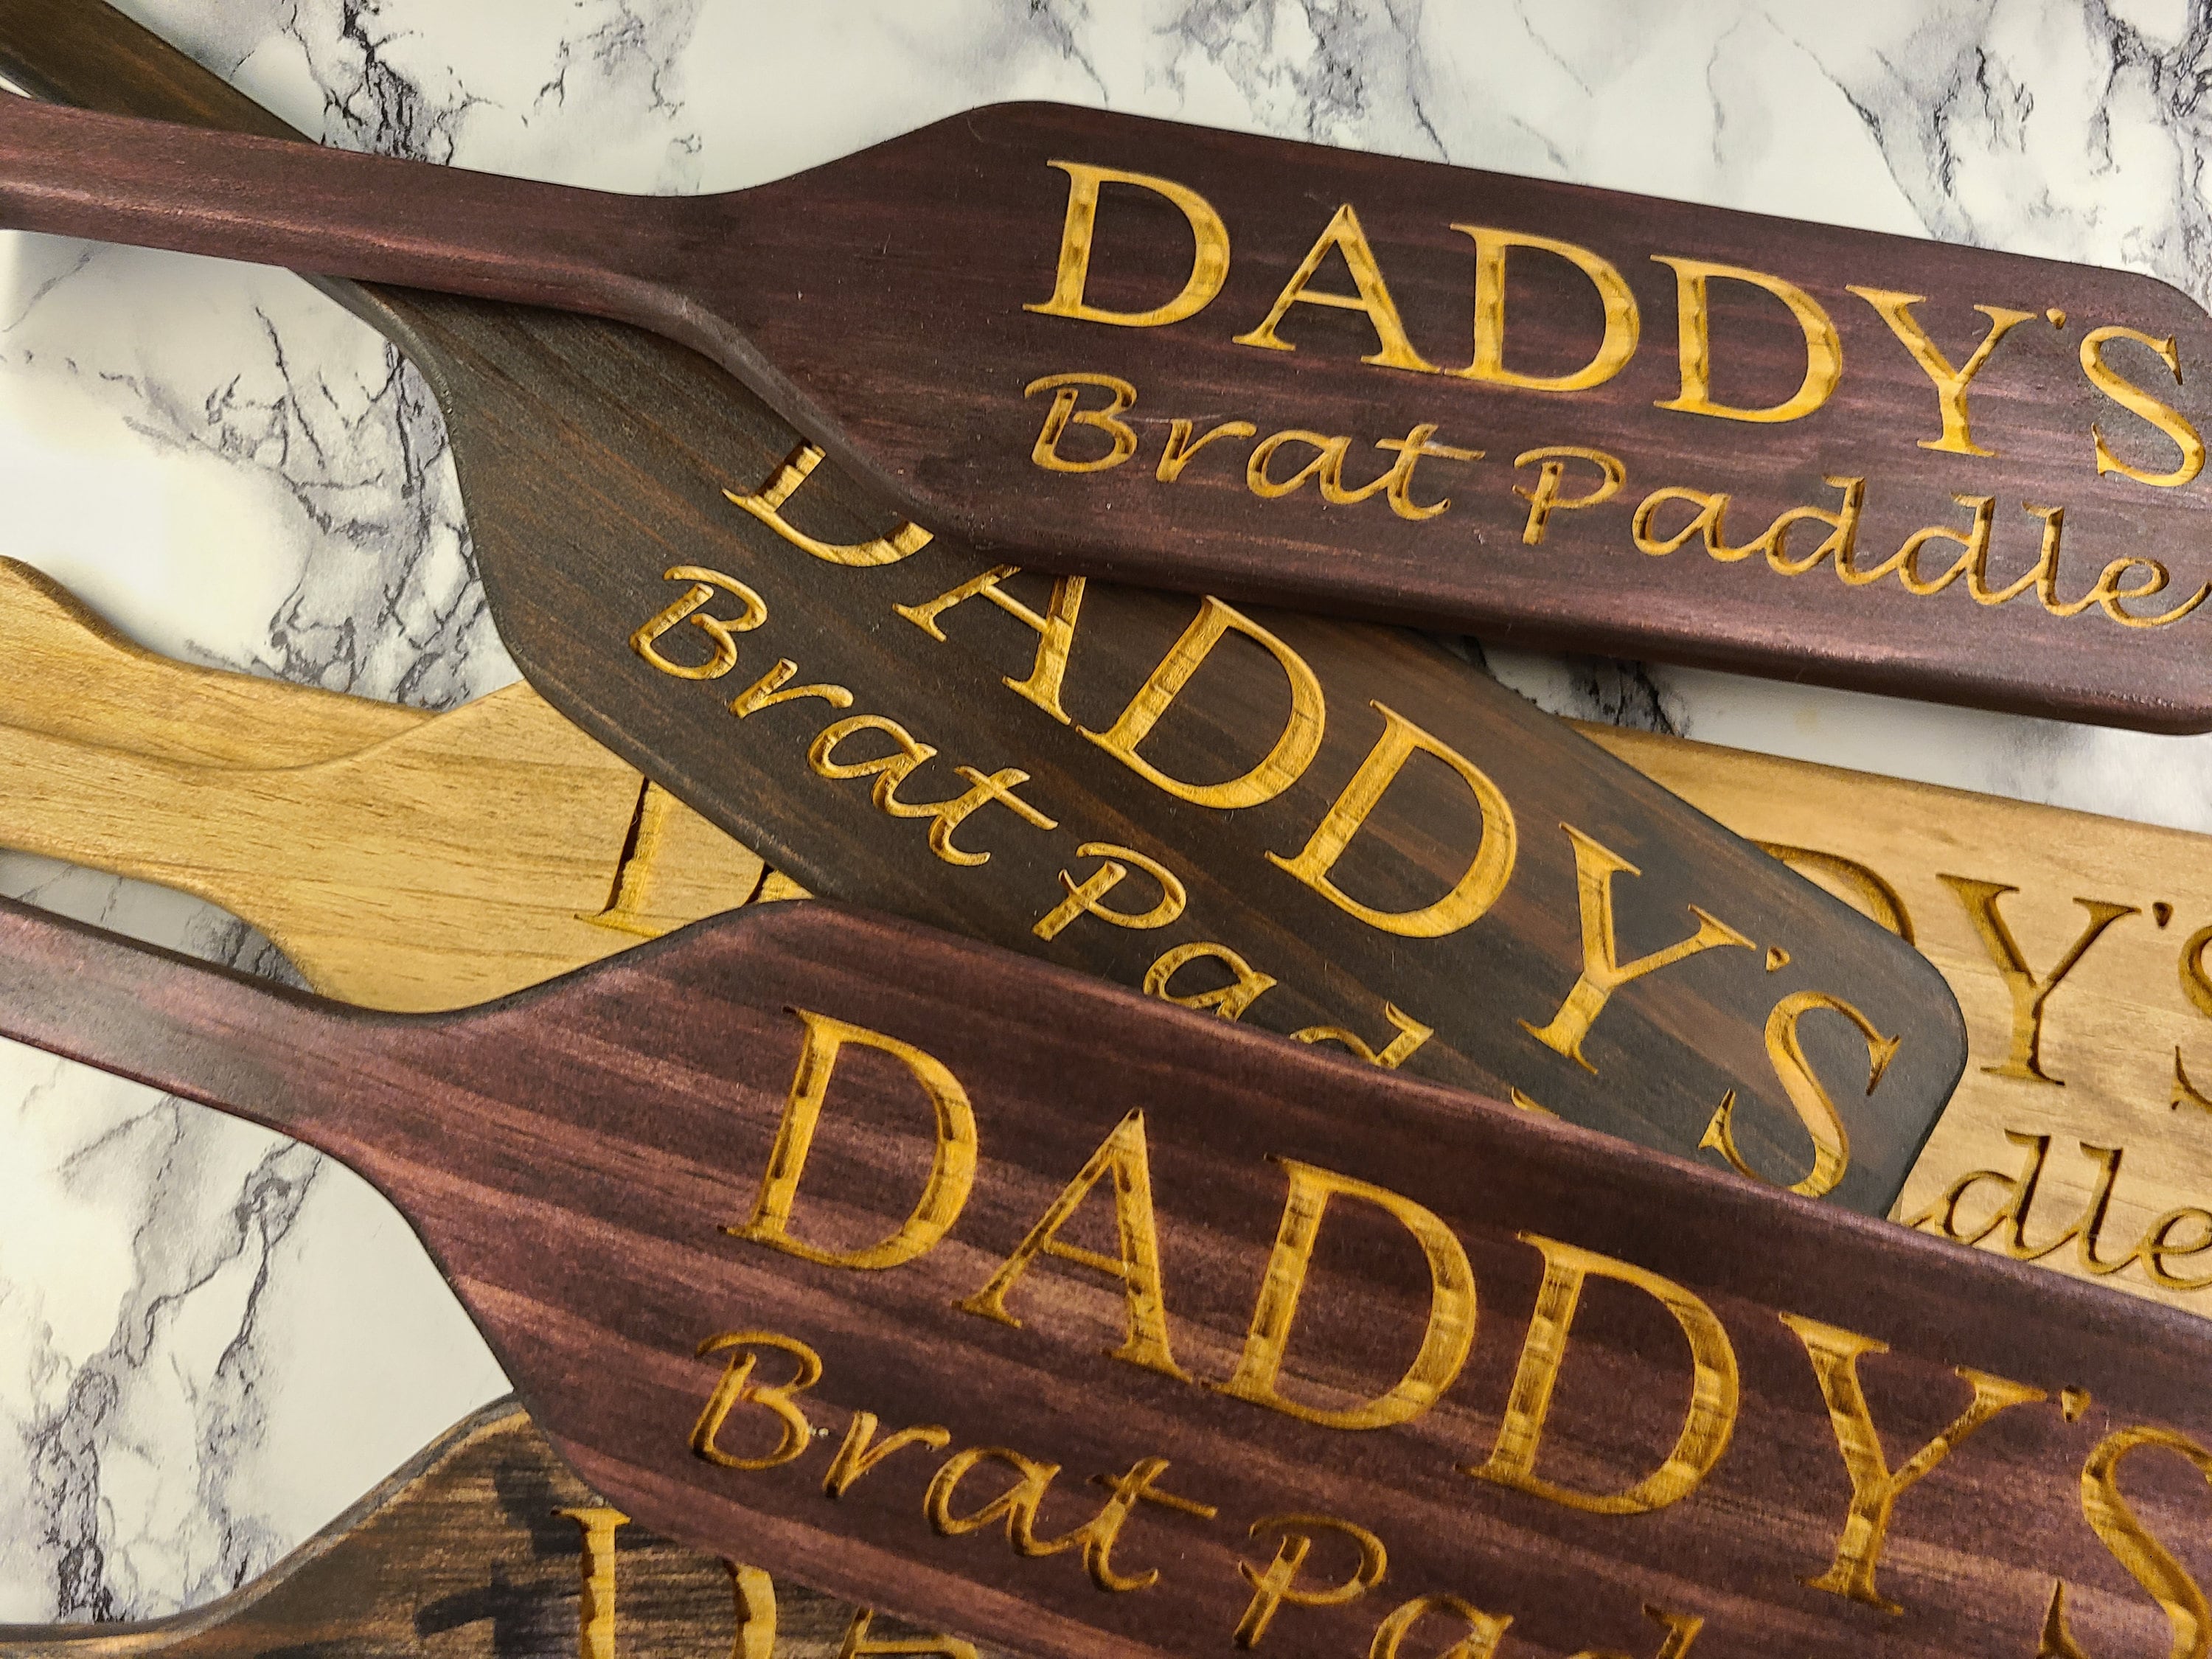 BDSM Imprint Spanking Paddle for Adult Sex Play (Daddy)